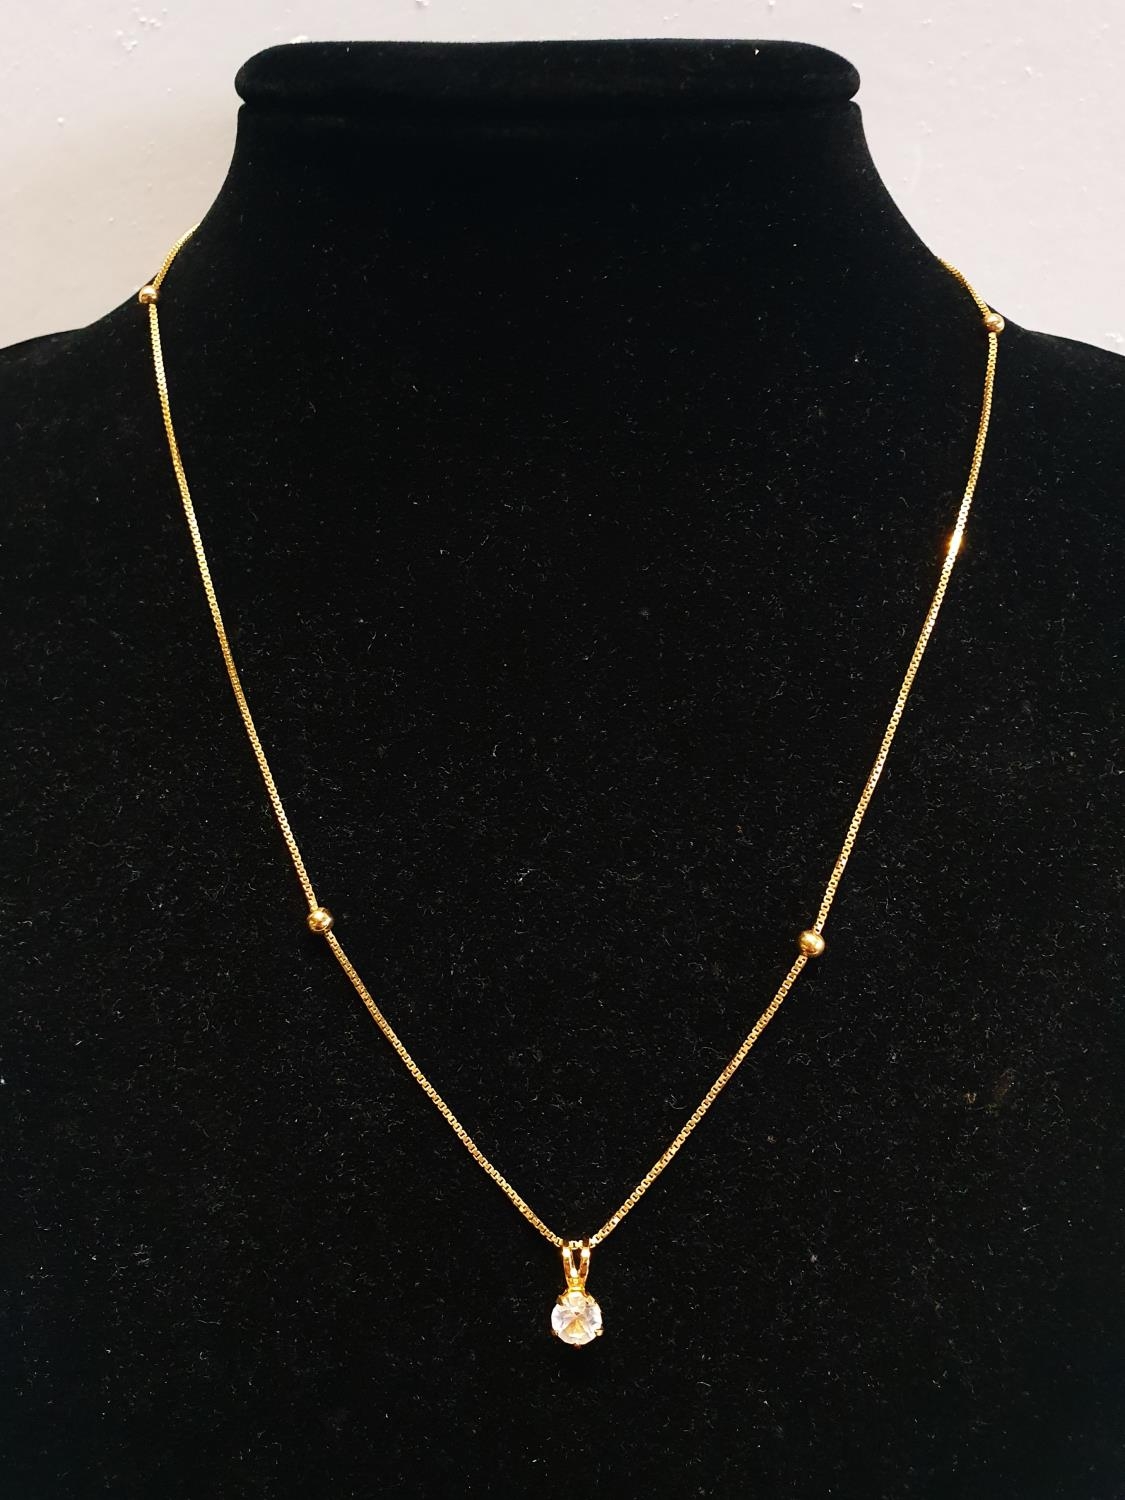 A 9ct Gold chain and pendant. 2.64g - Image 2 of 2